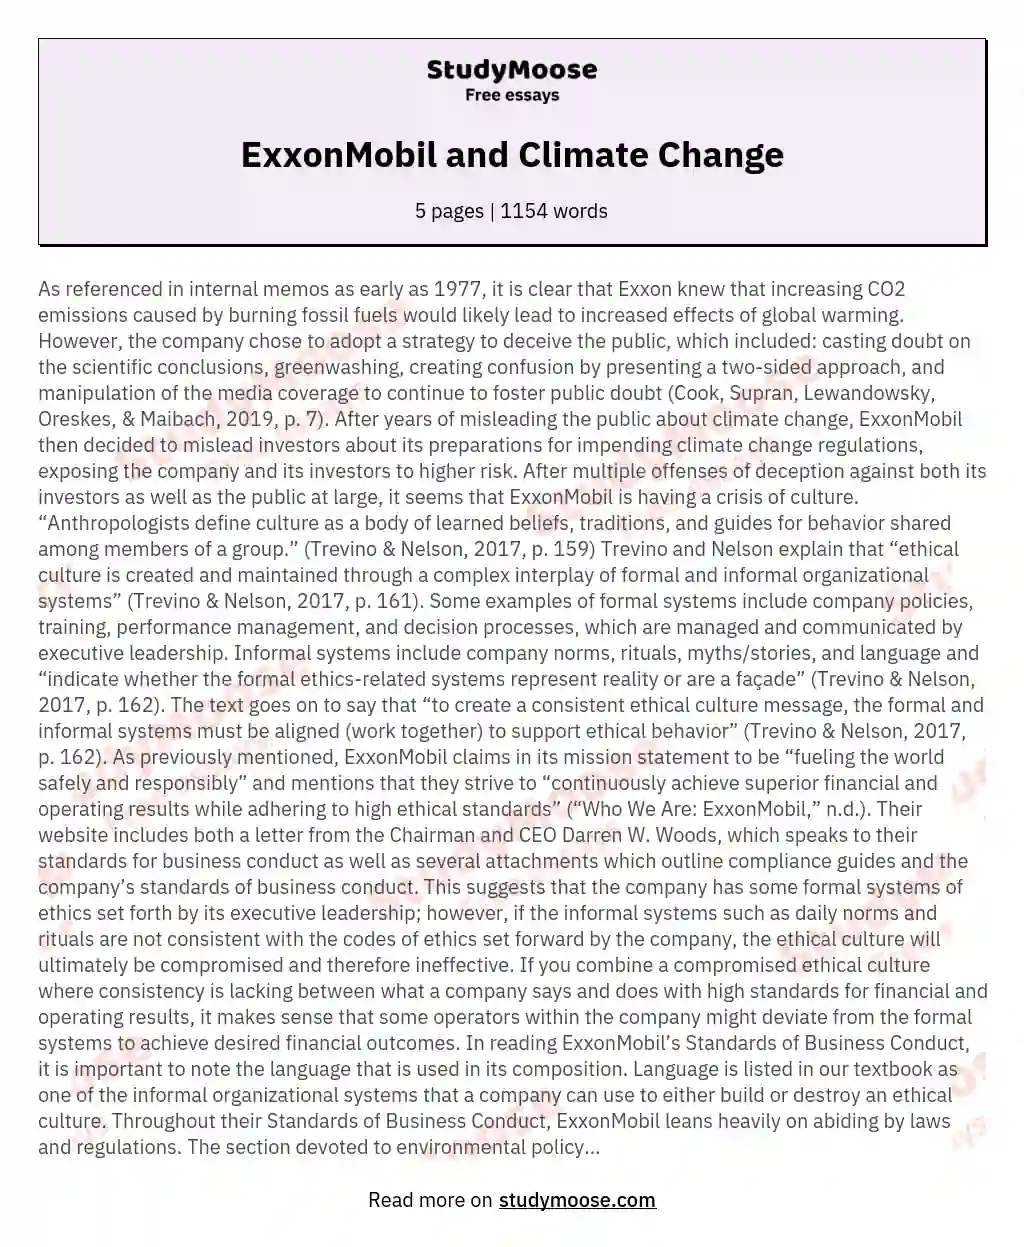 ExxonMobil and Climate Change essay